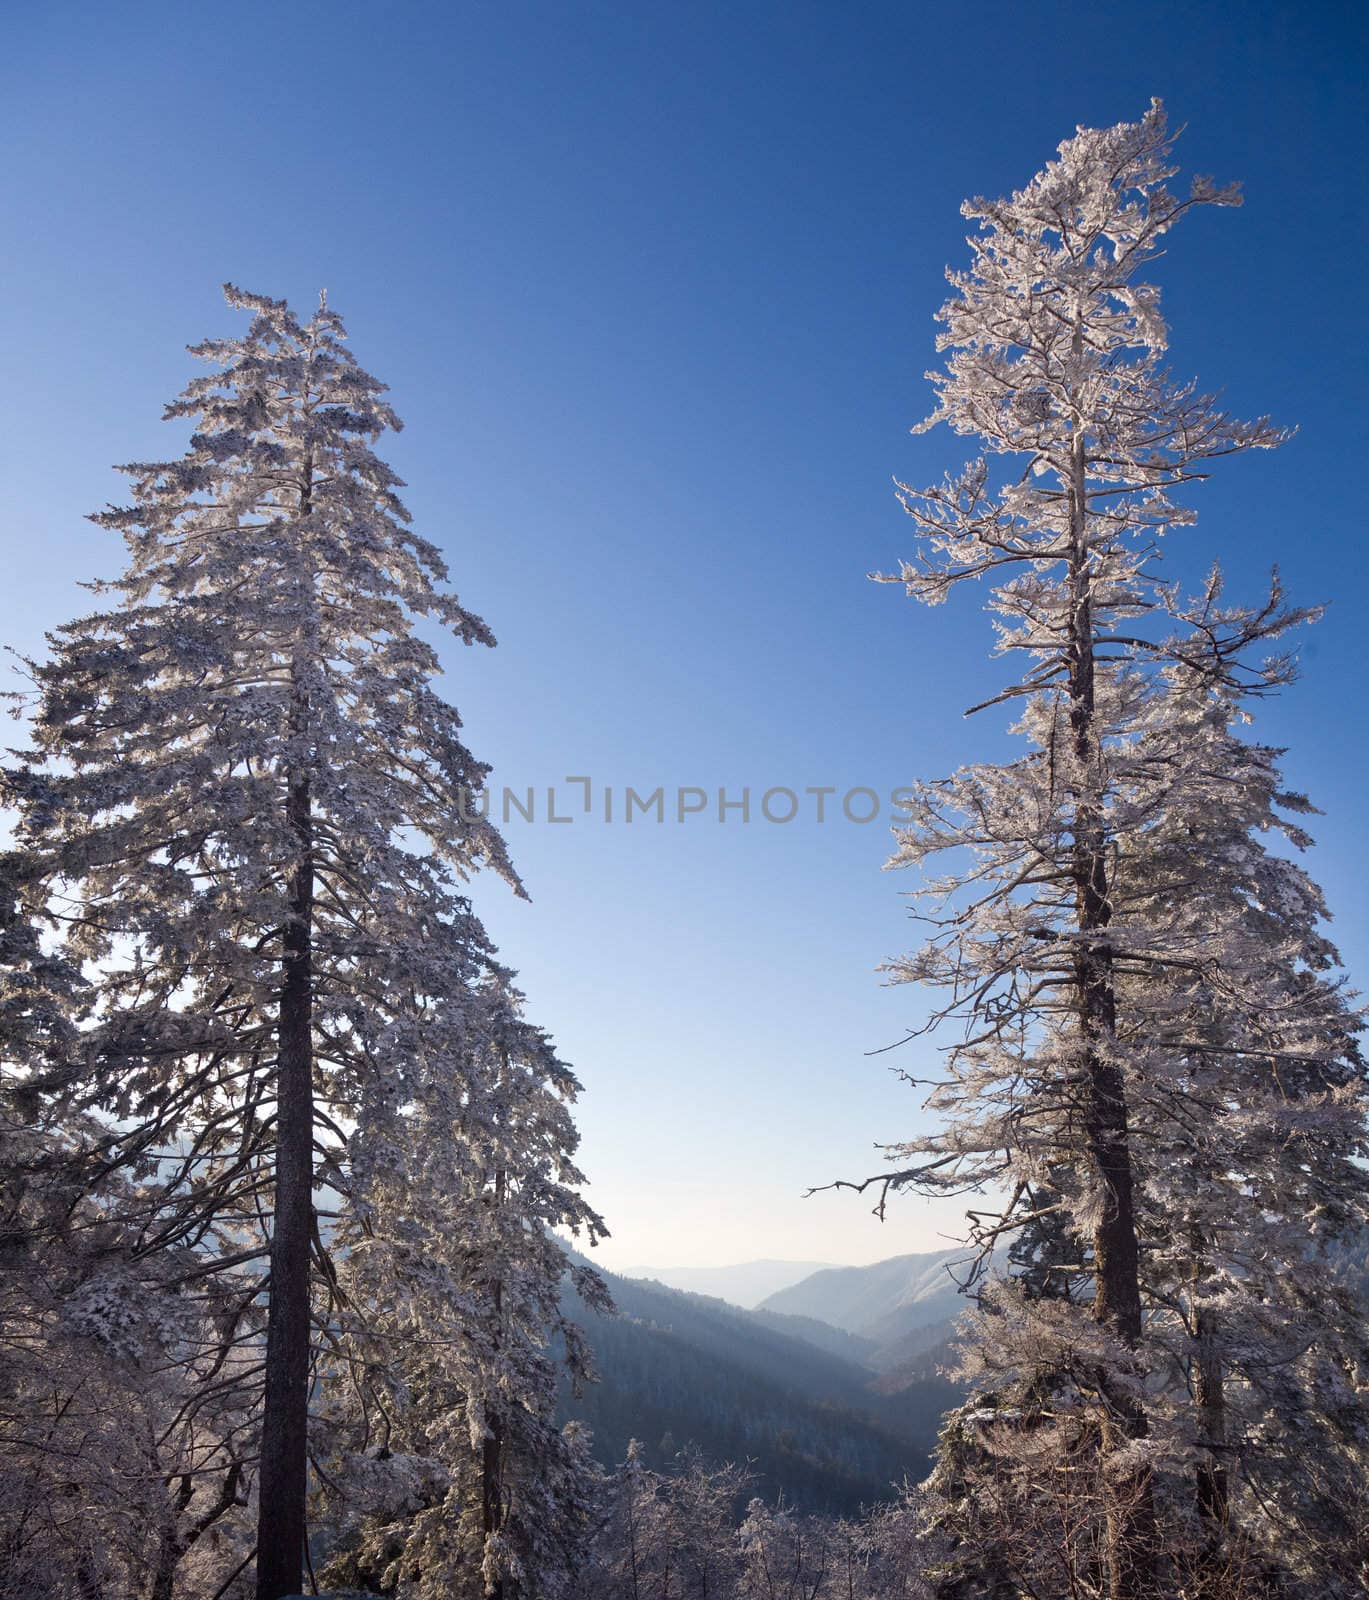 Pine trees covered in snow on skyline by steheap